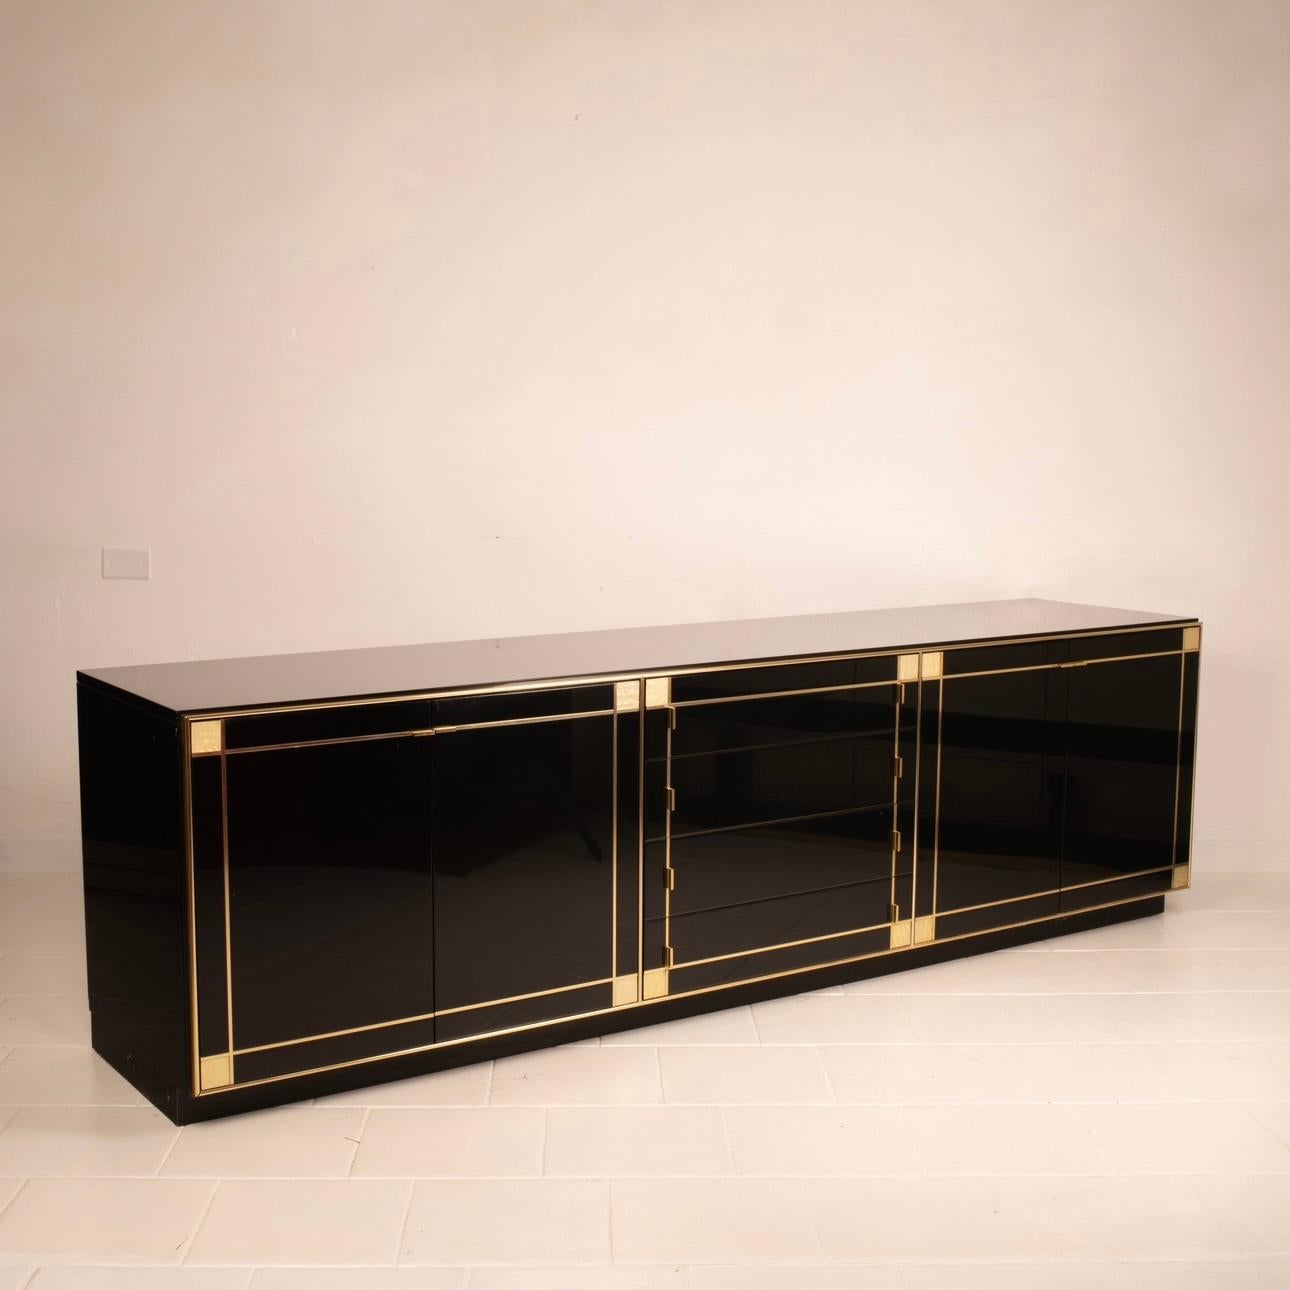 Late 20th Century Sideboard with Mother of Pearl Decorations by Pierre Cardin for Roche Bobois For Sale